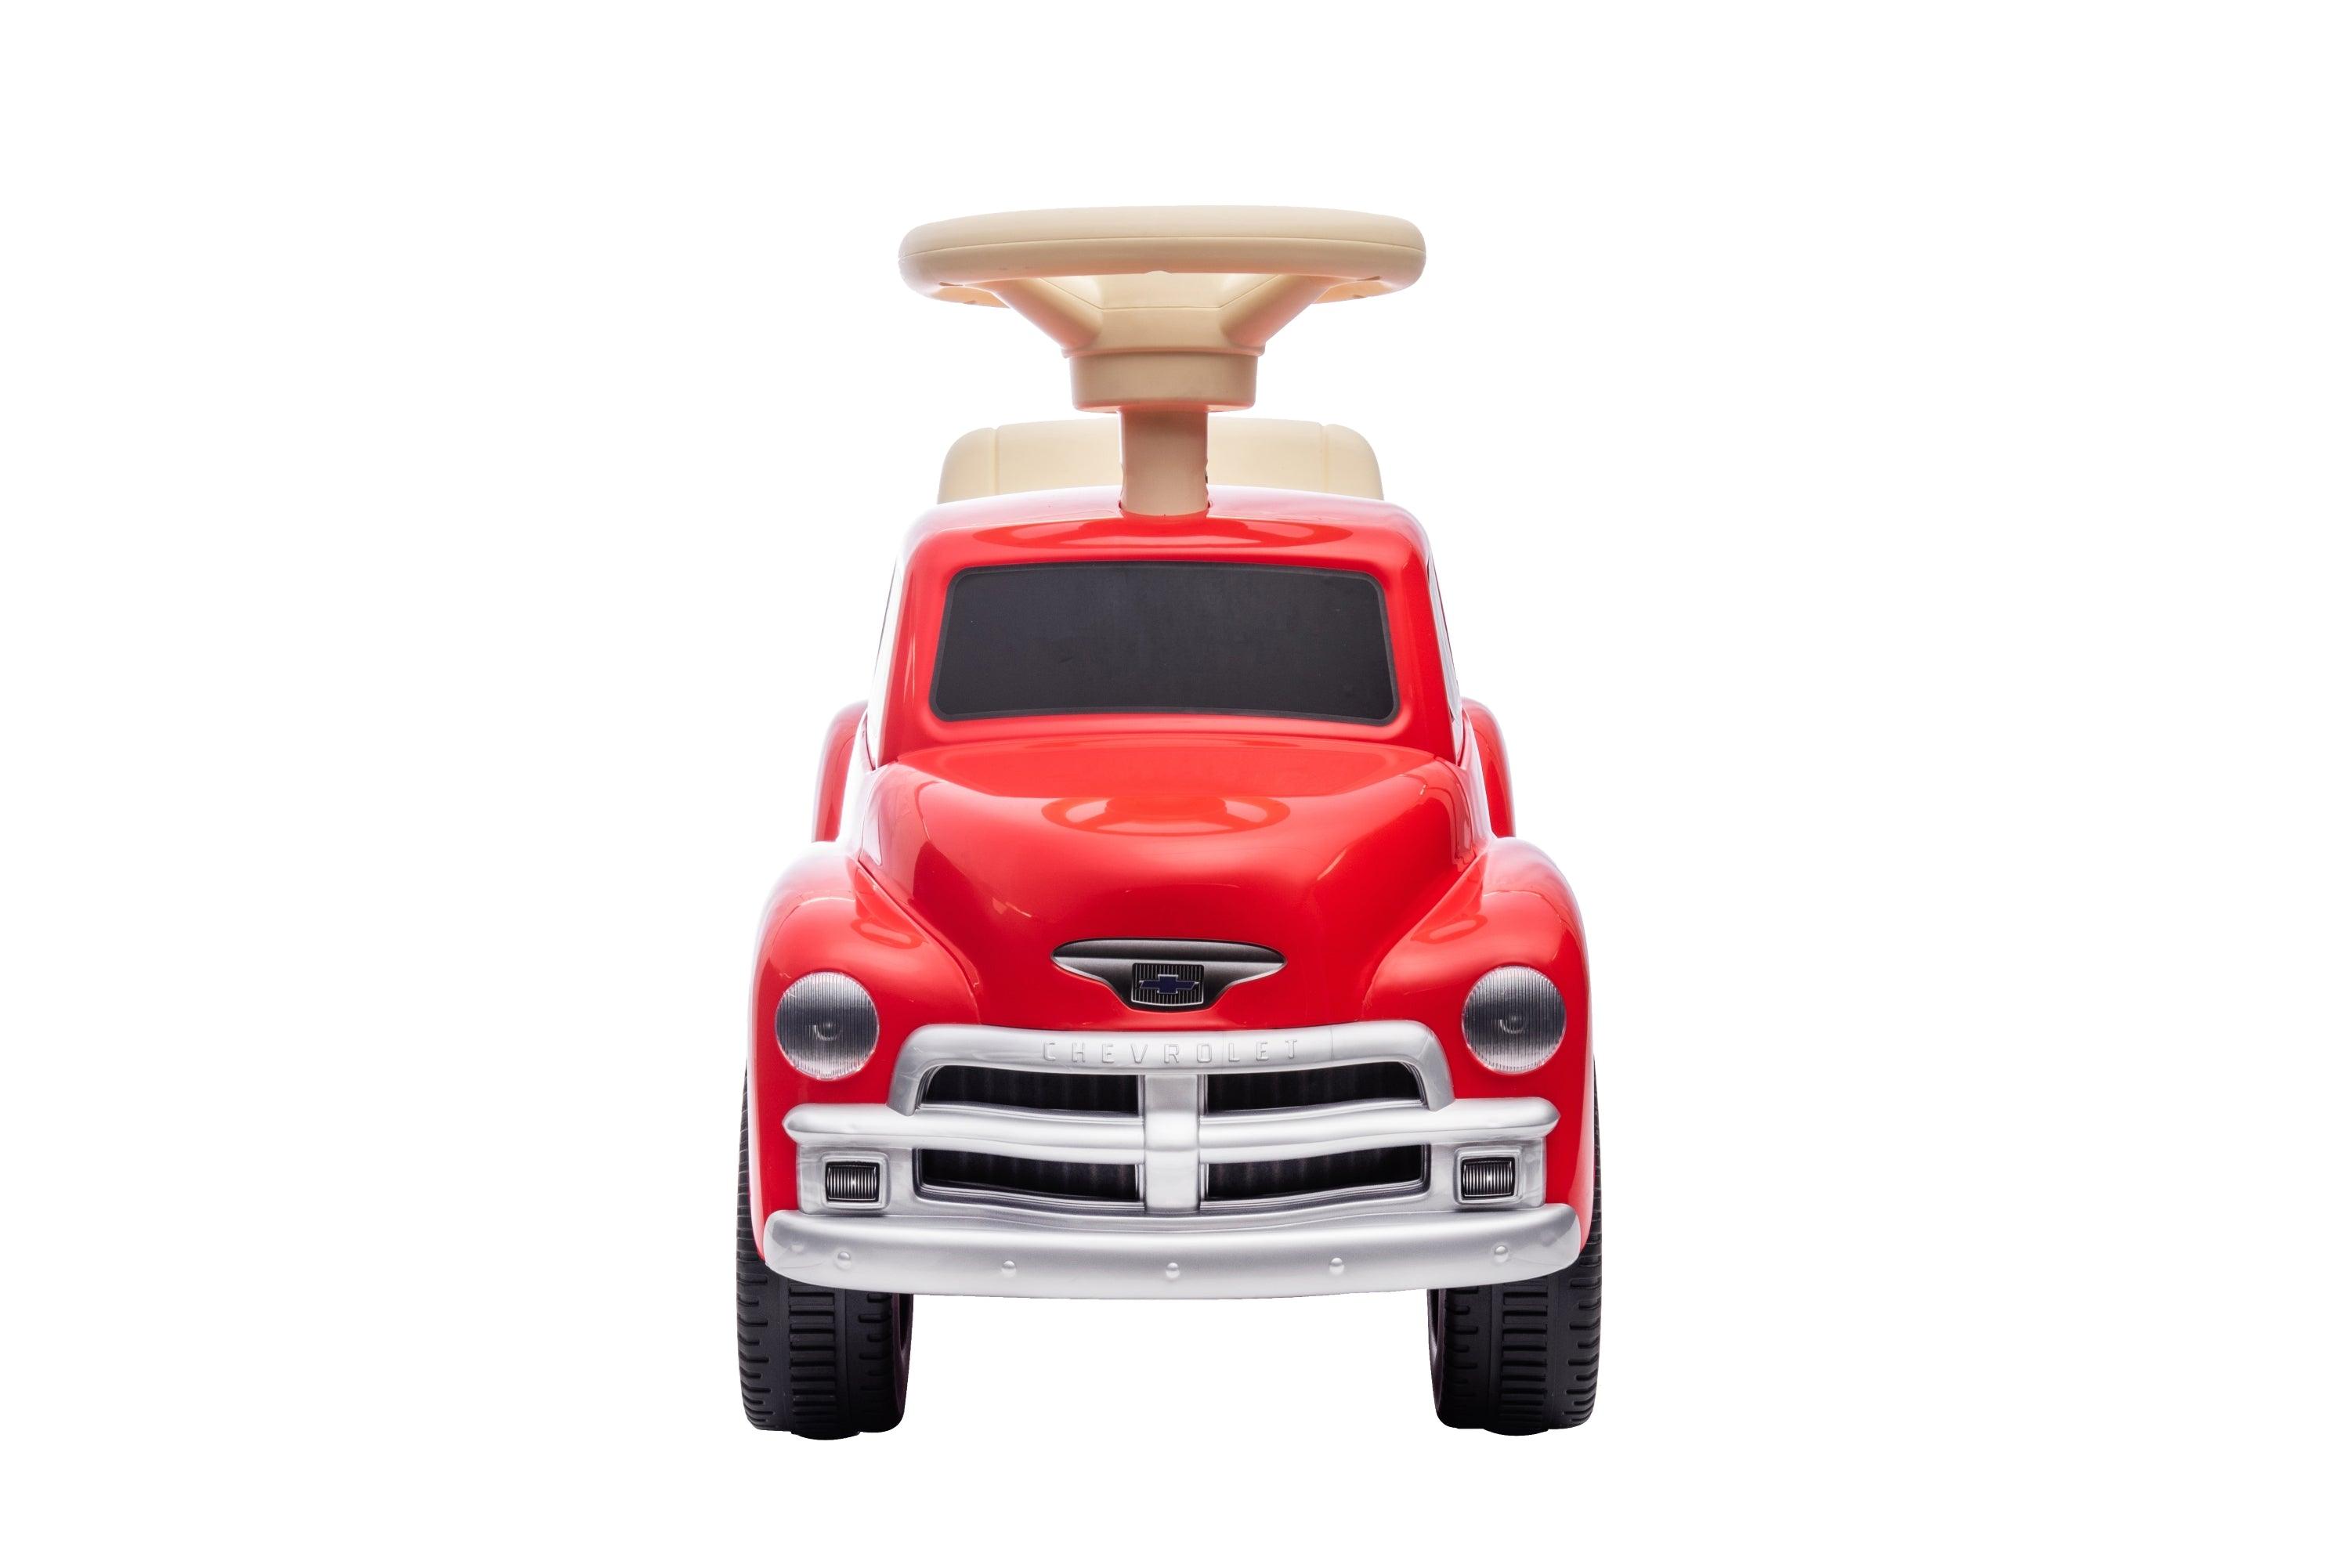 Chevrolet 3100 Vintage Push Car for Toddlers - DTI Direct USA